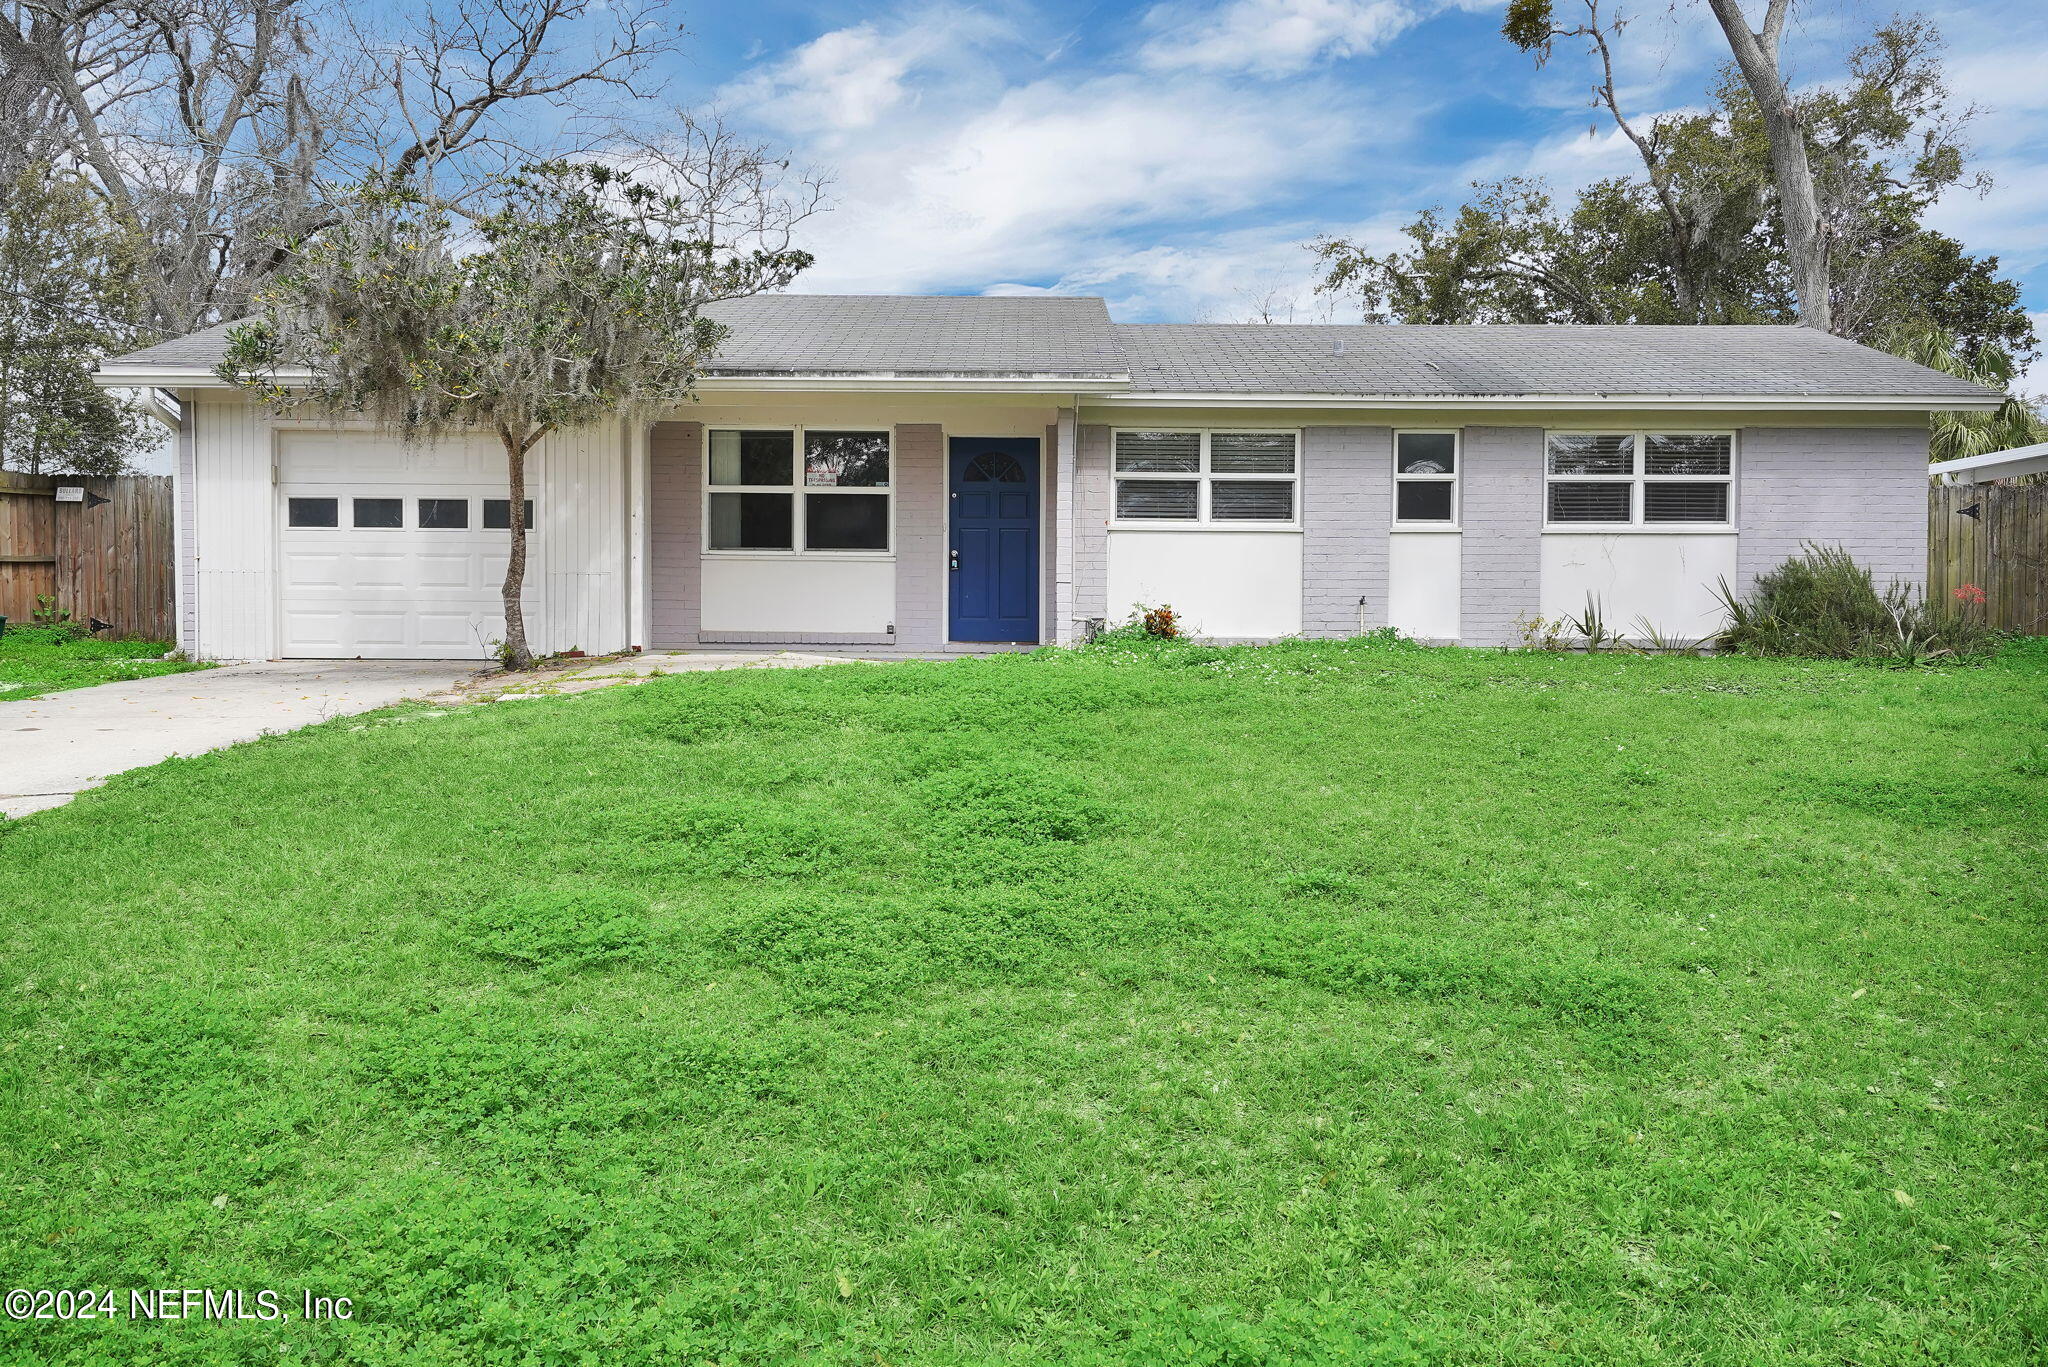 Jacksonville Beach, FL home for sale located at 1621 2ND Avenue N, Jacksonville Beach, FL 32250